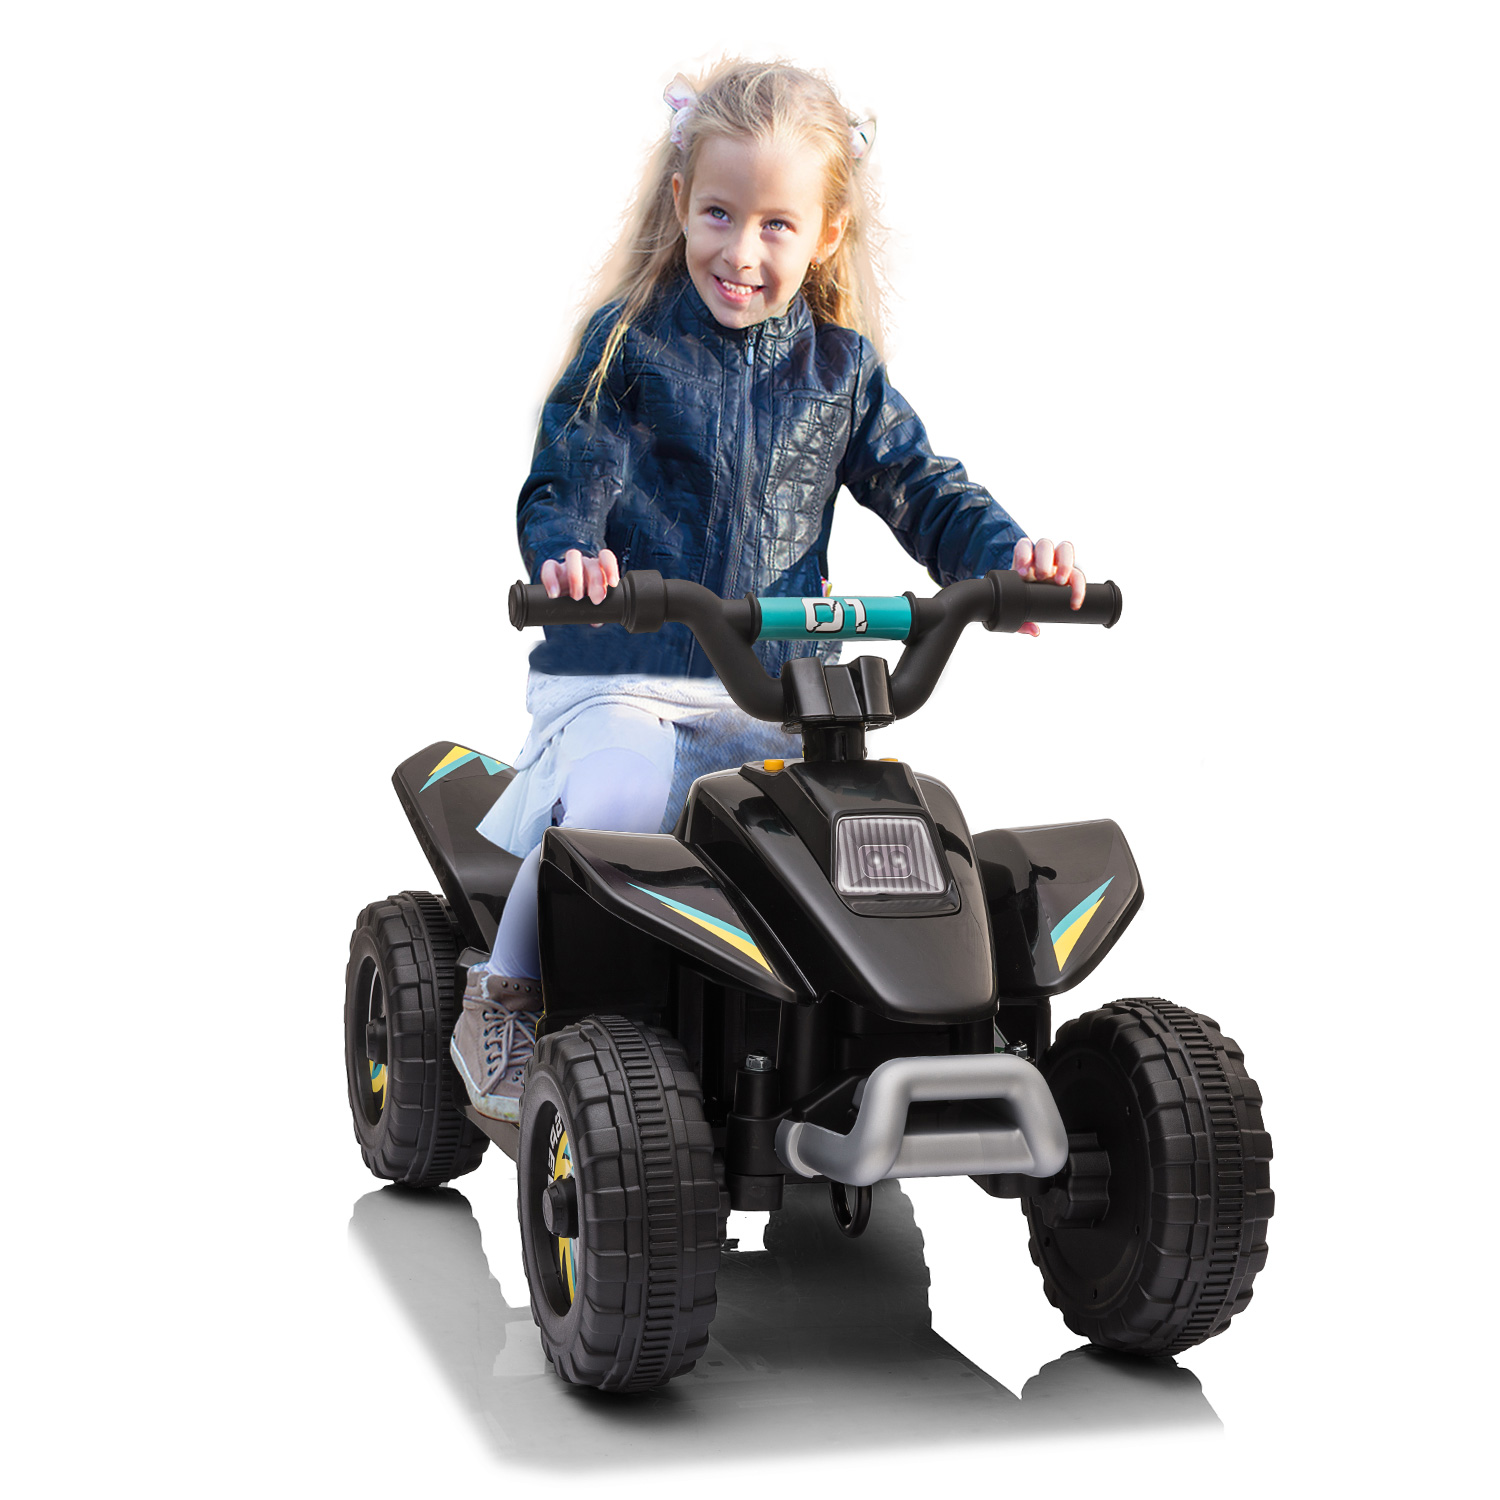 6V Kids Ride On Motorcycle with Headlights, Battery-Powered 4-Wheel Bicycle - Black-CASAINC